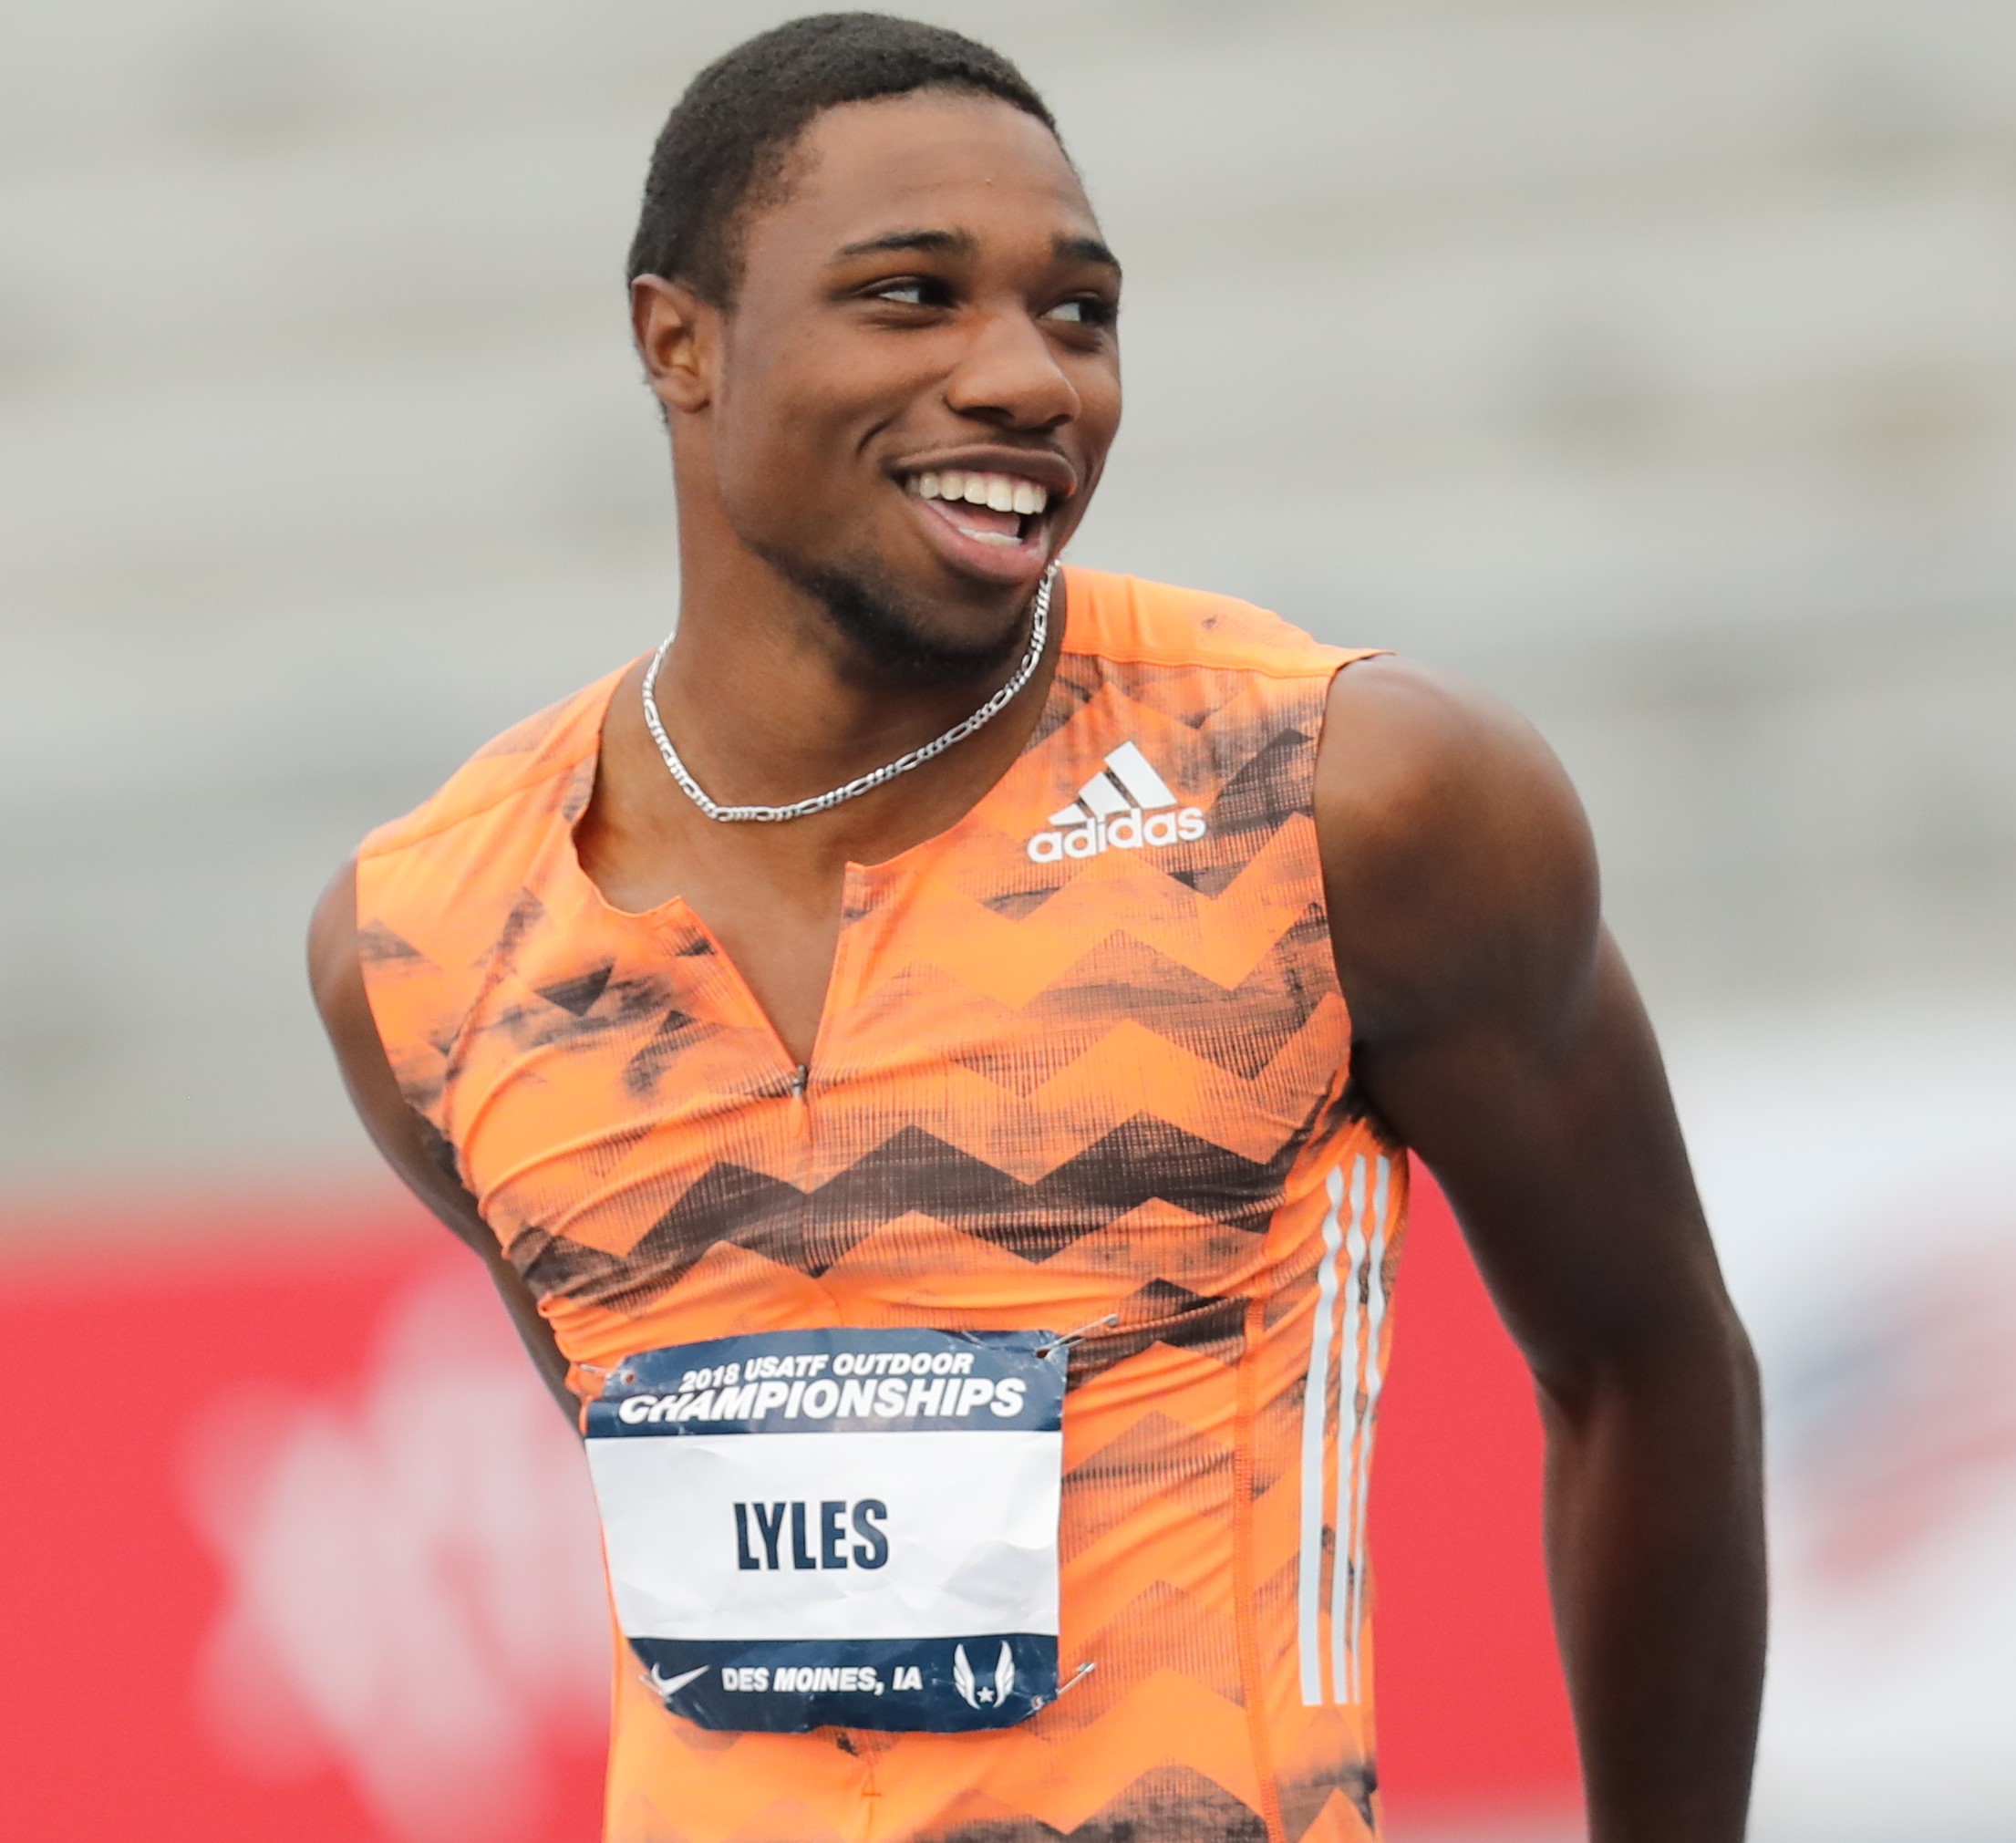 Rookie Lyles in Monaco shoot-out with old timer Gatlin